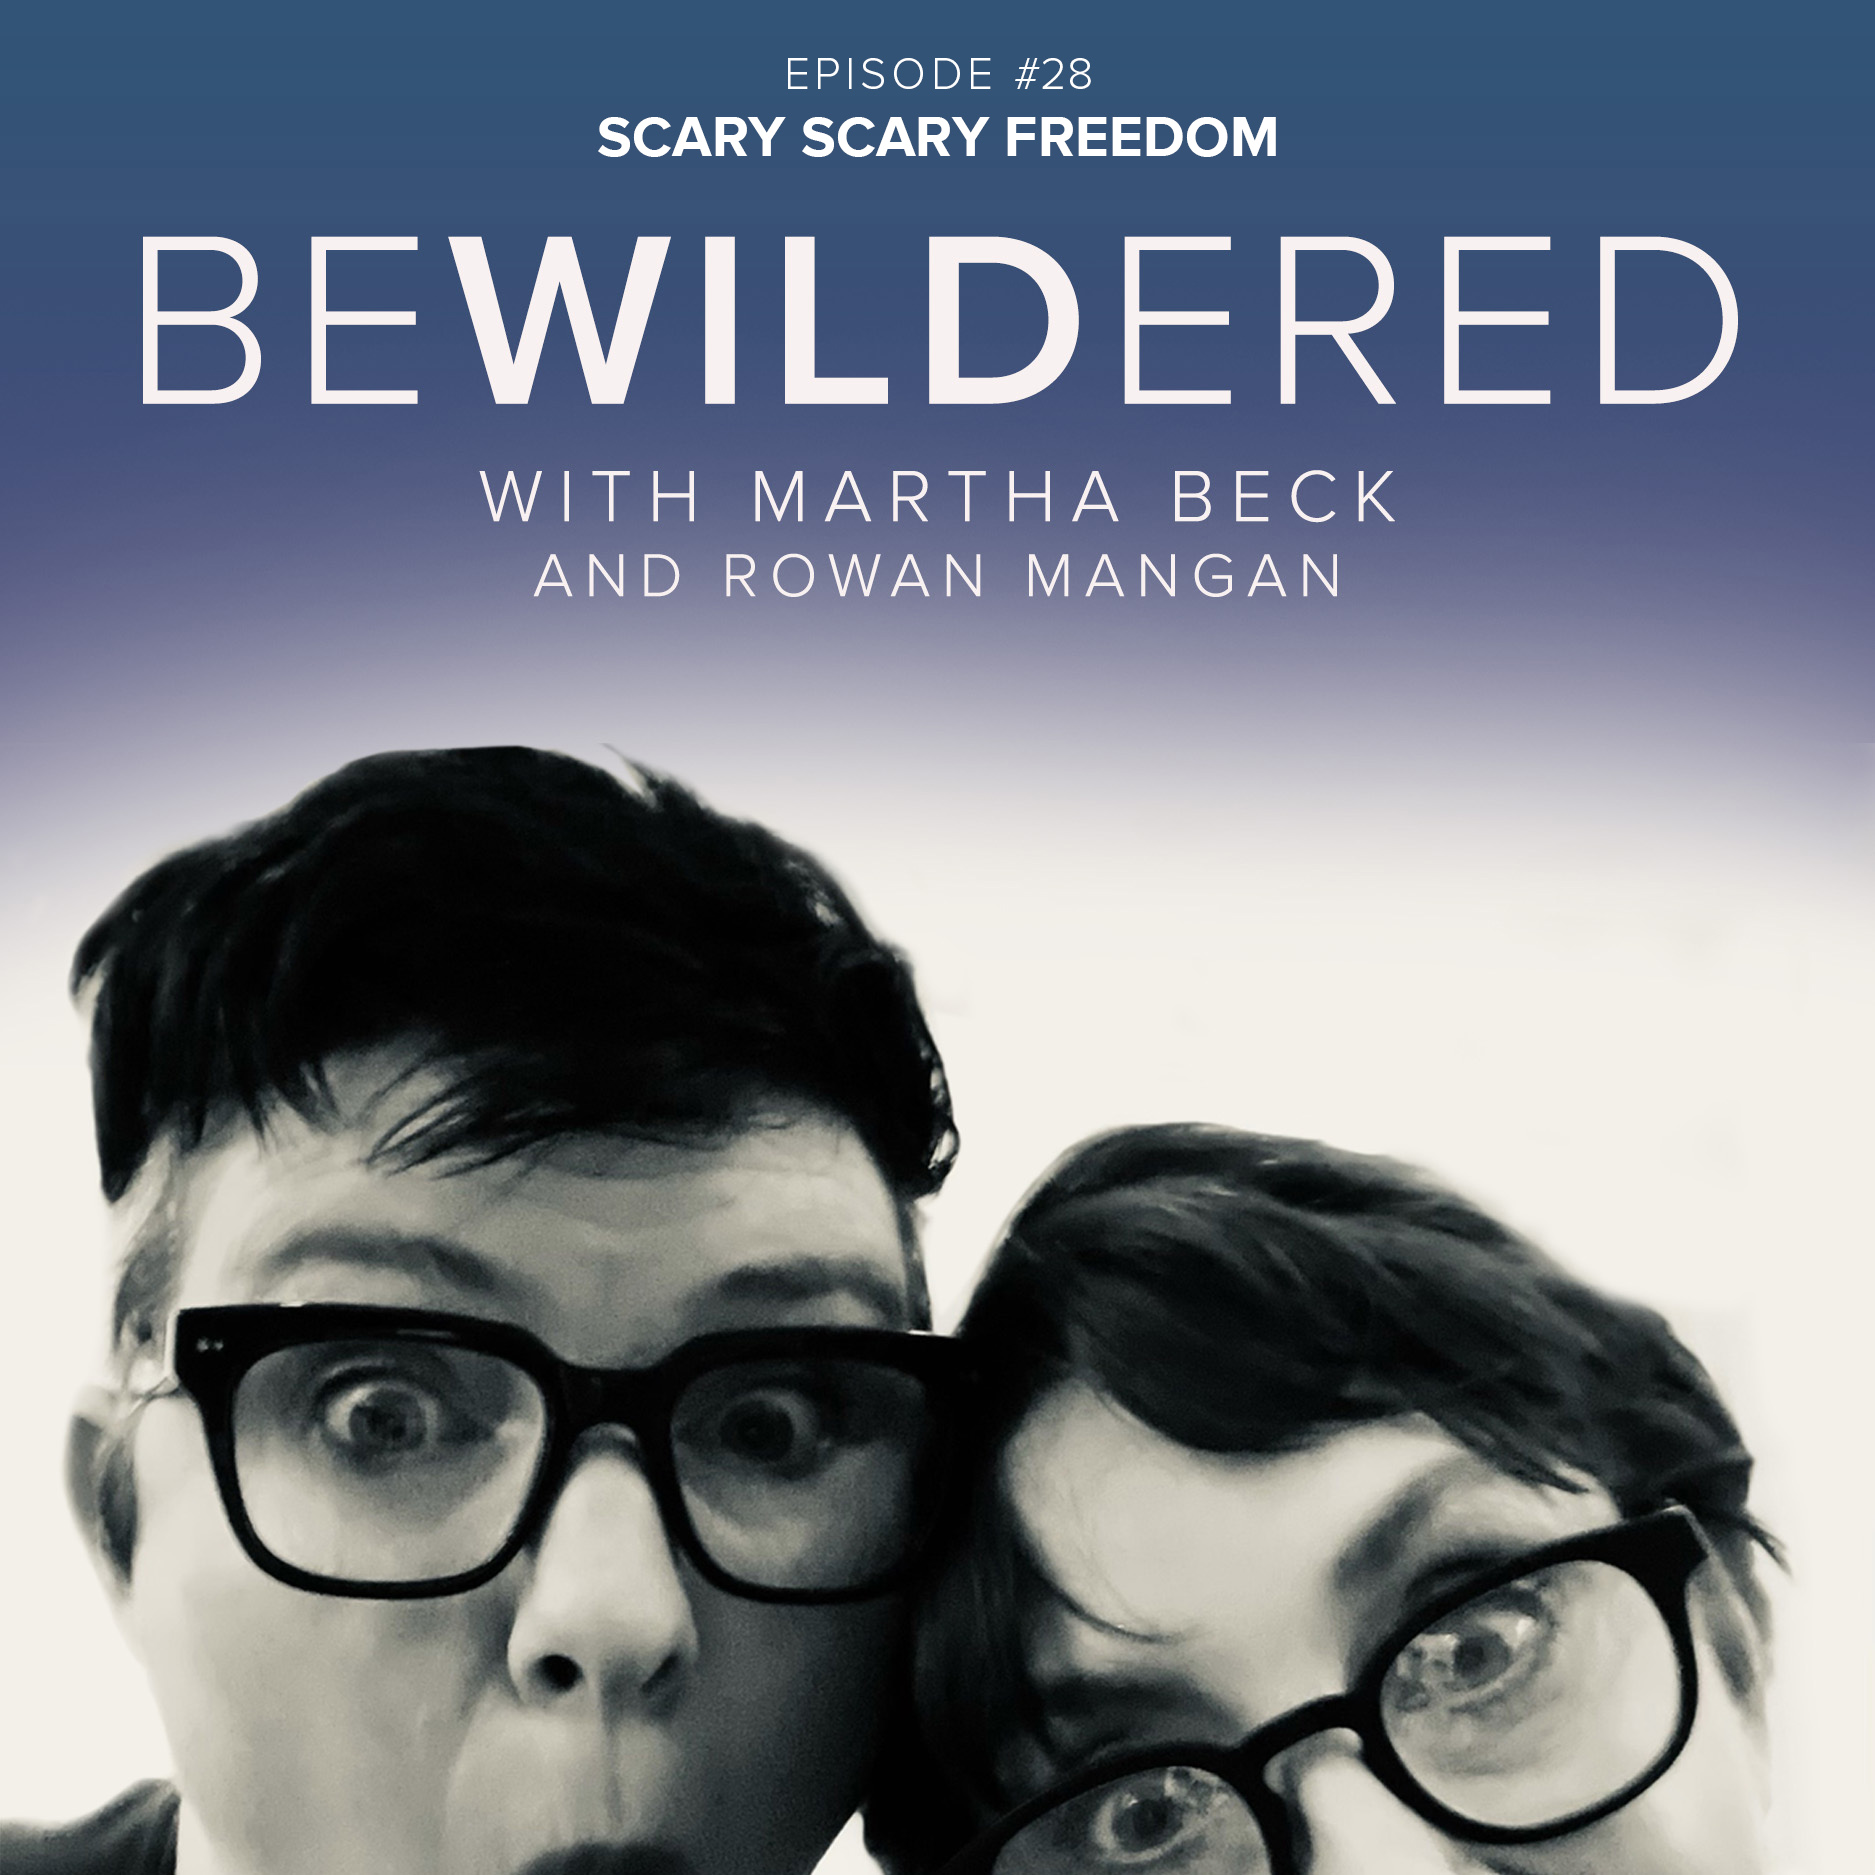 Image for Episode #28 Scary Scary Freedom for the Bewildered Podcast with Martha Beck and Rowan Mangan